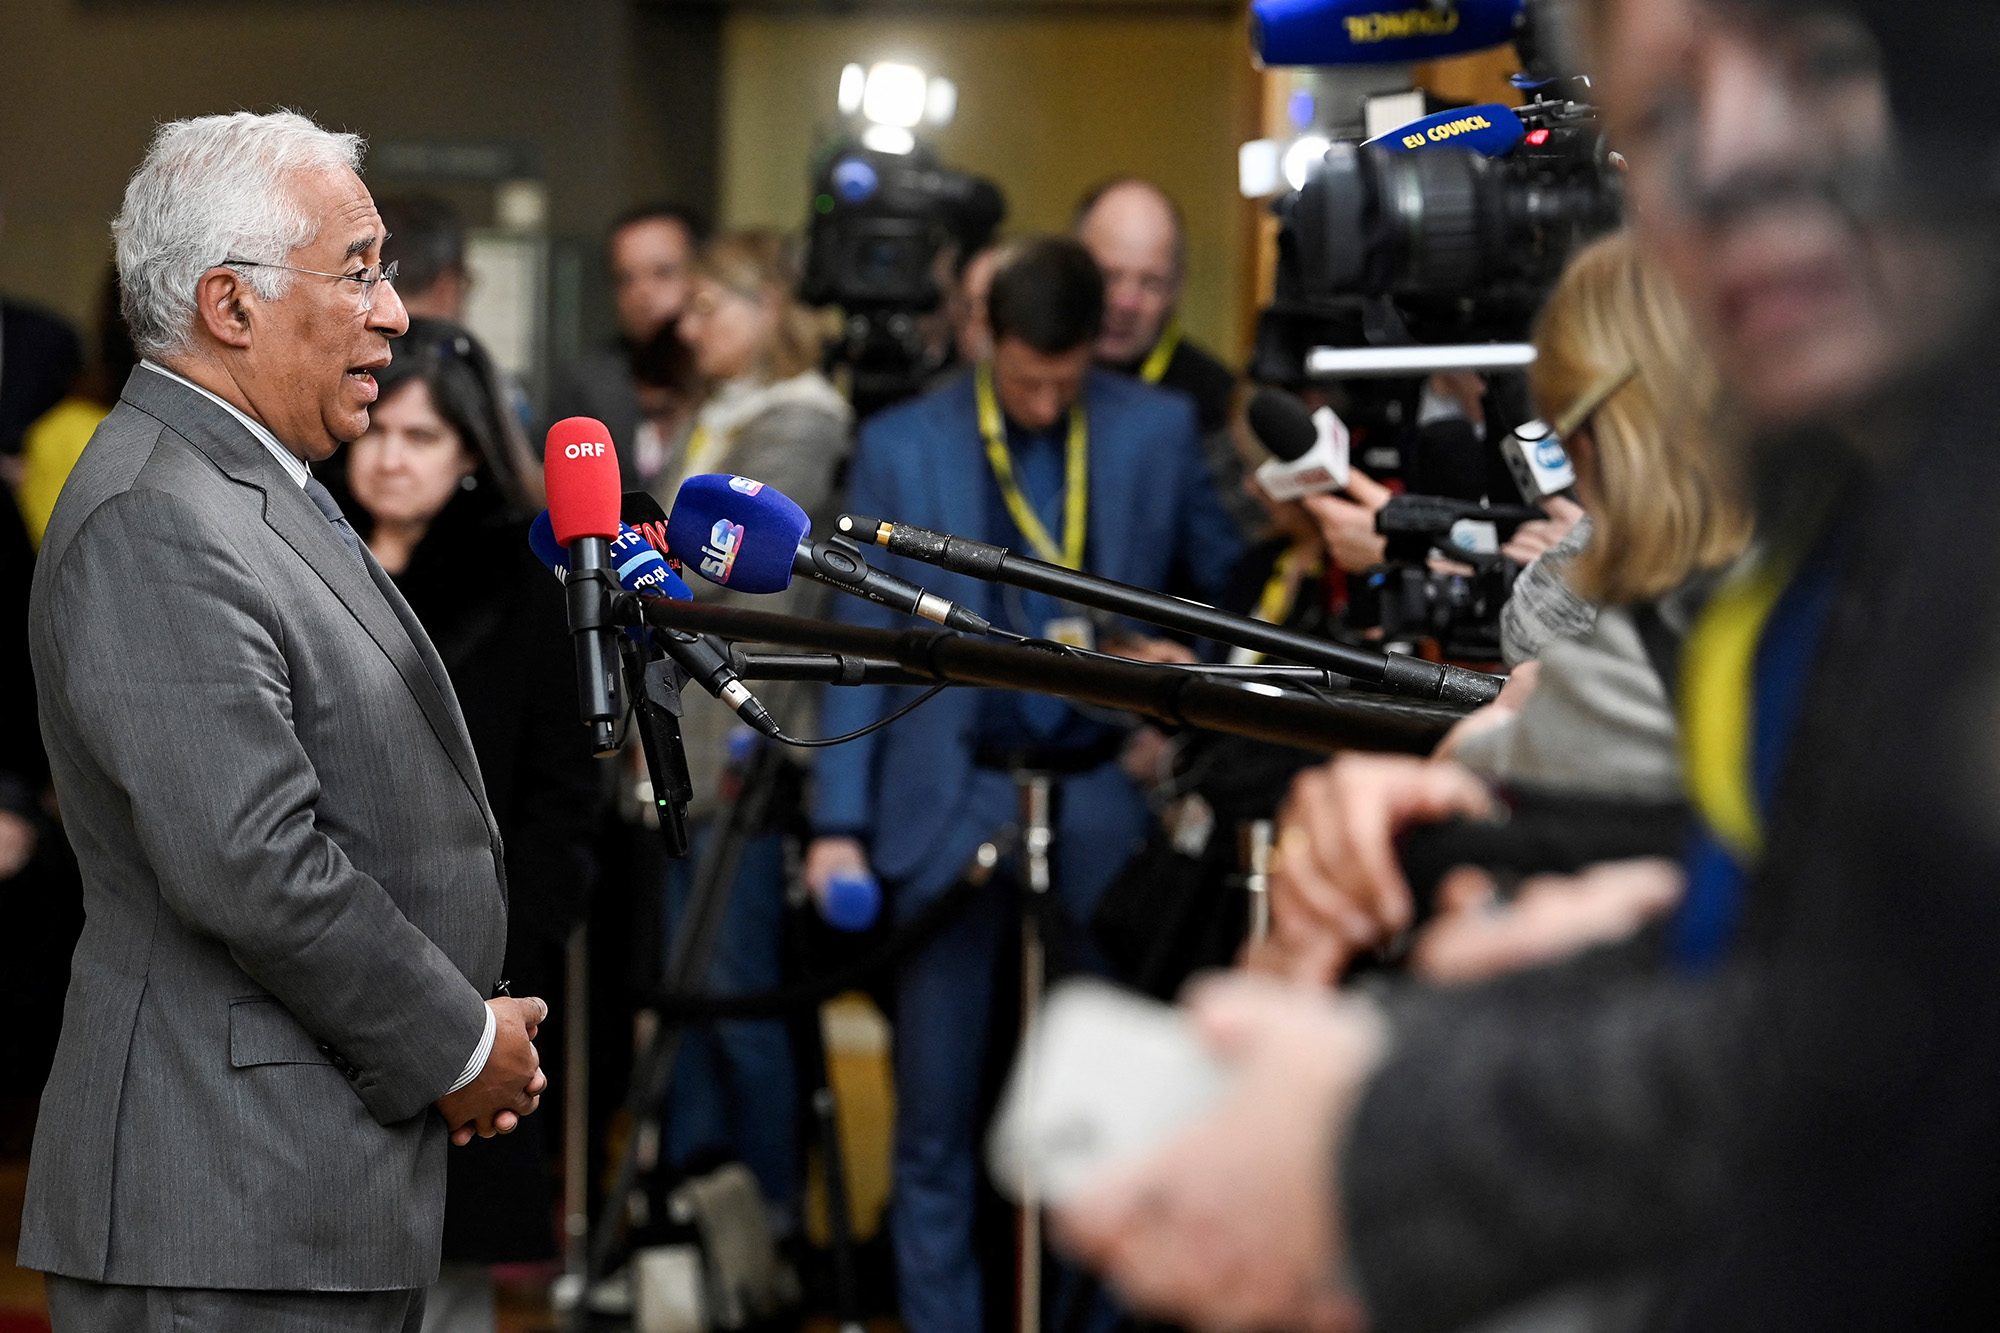 Portugal's Prime Minister Antonio Costa answers journalists' questions as he arrives for a summit in Brussels, Belgium, on February 9. 